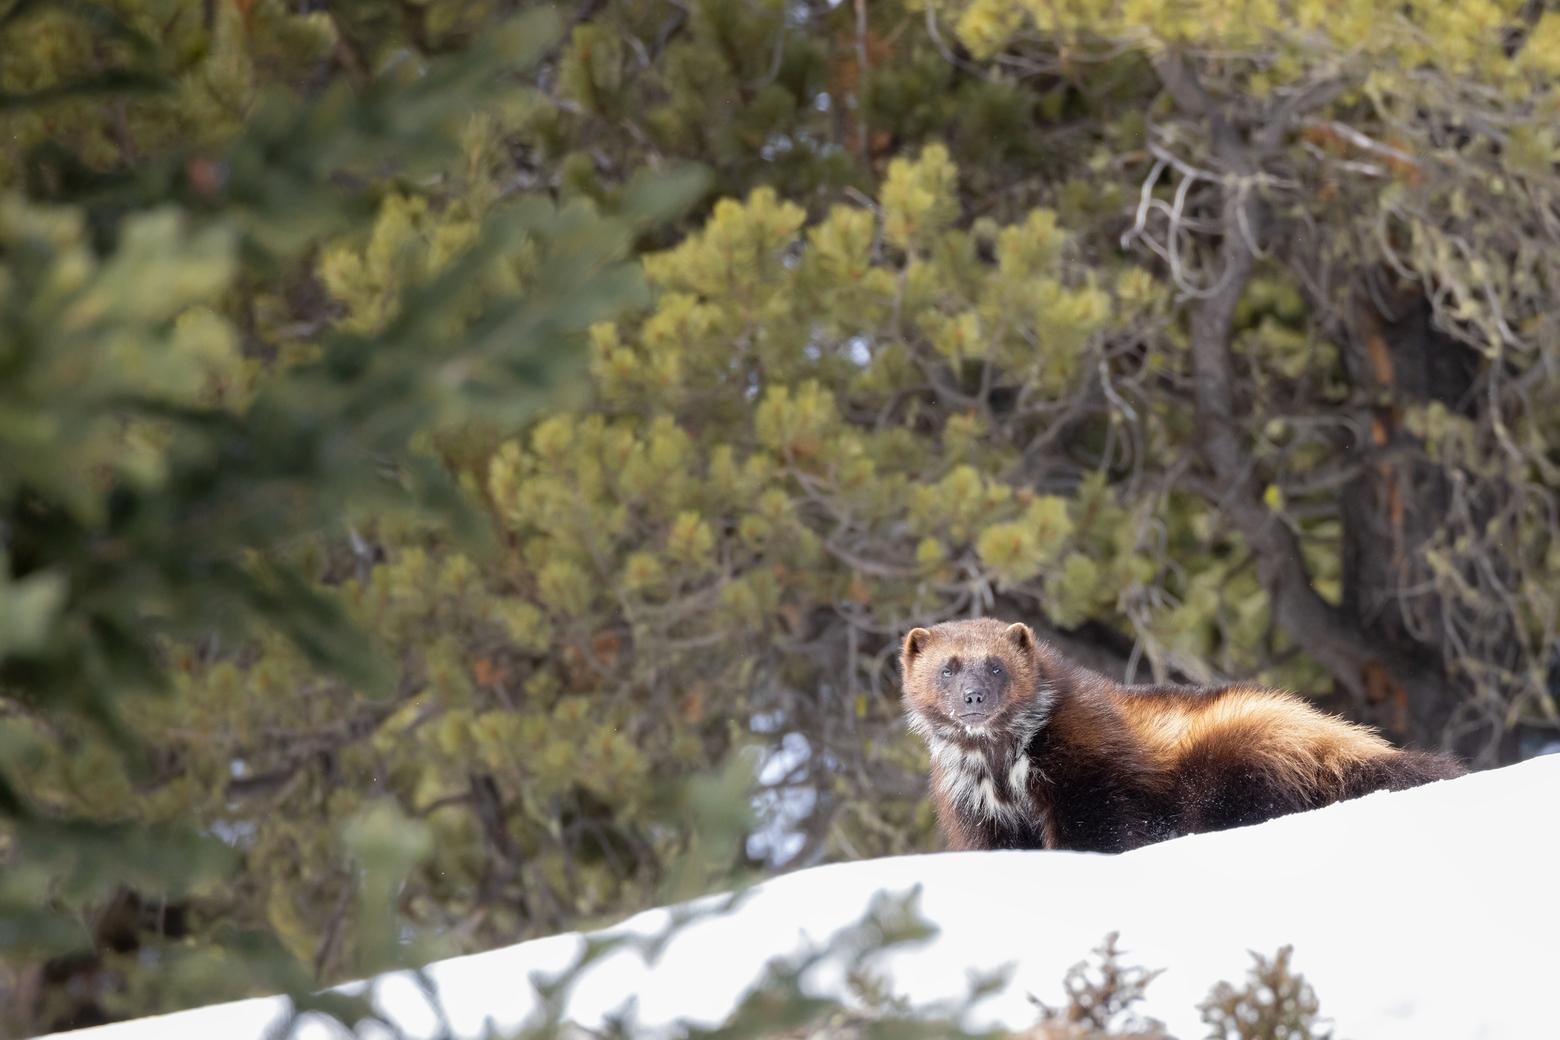 Approximately 300 wolverines lives in the Lower 48. With massive habitats ranging up to 500 square miles, they face a multitude of challenges. Here, MacNeil Lyons in March of 2022 photographed one of an estimated six wolverines in 2.2 million-acre Yellowstone National Park. Photo by MacNeil Lyons/Yellowstone Insight